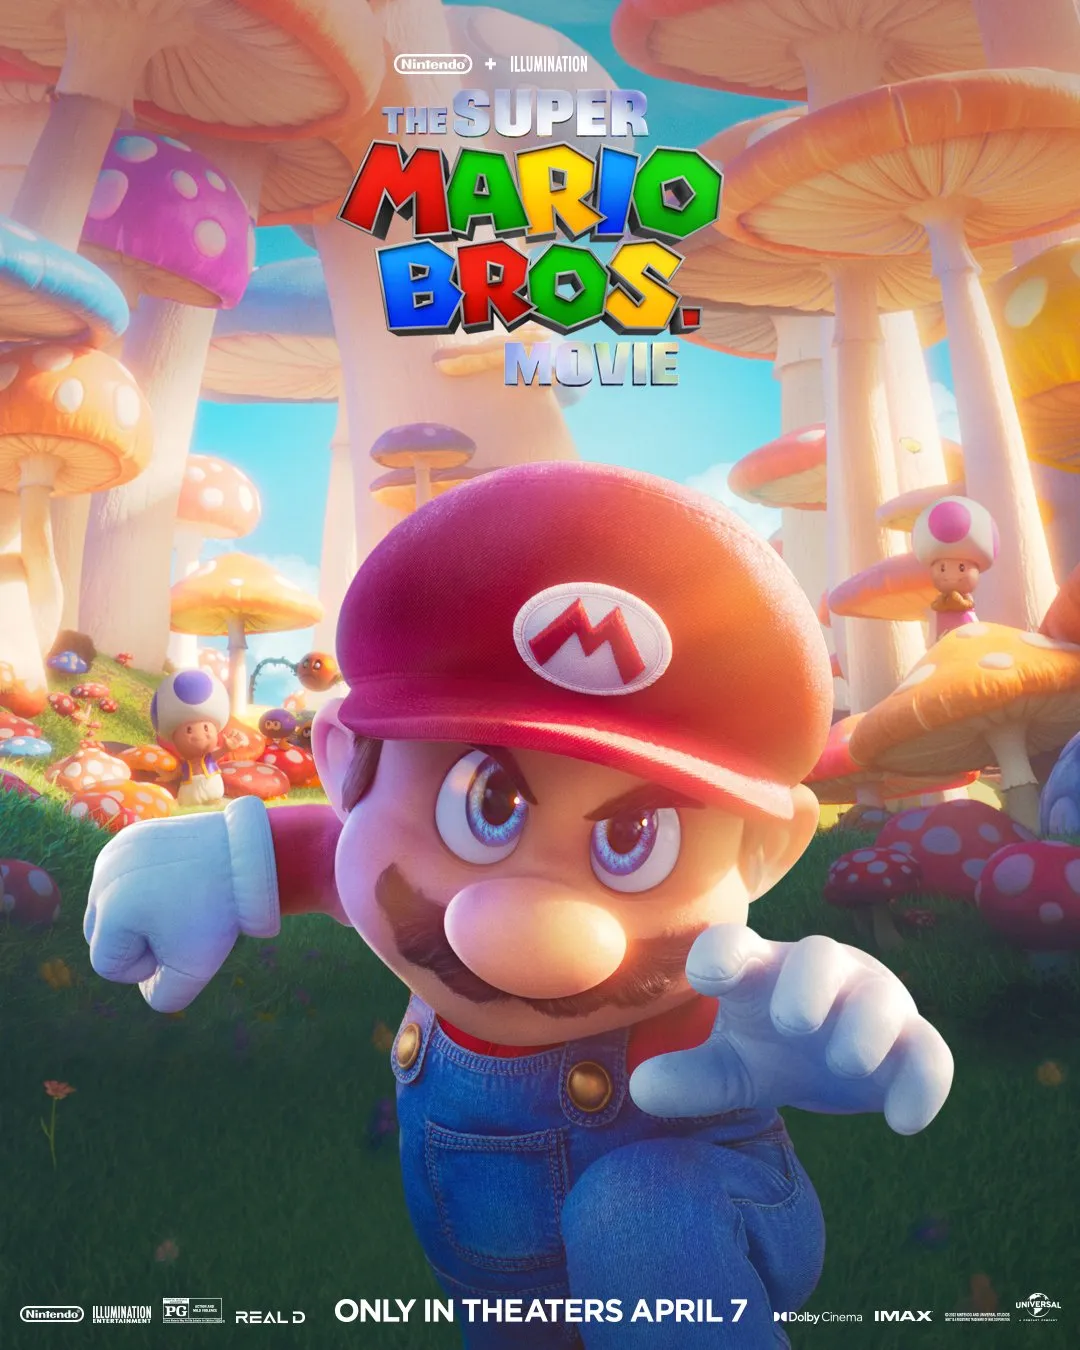 Mario Movie Posters Revealed by Nintendo for Every Character